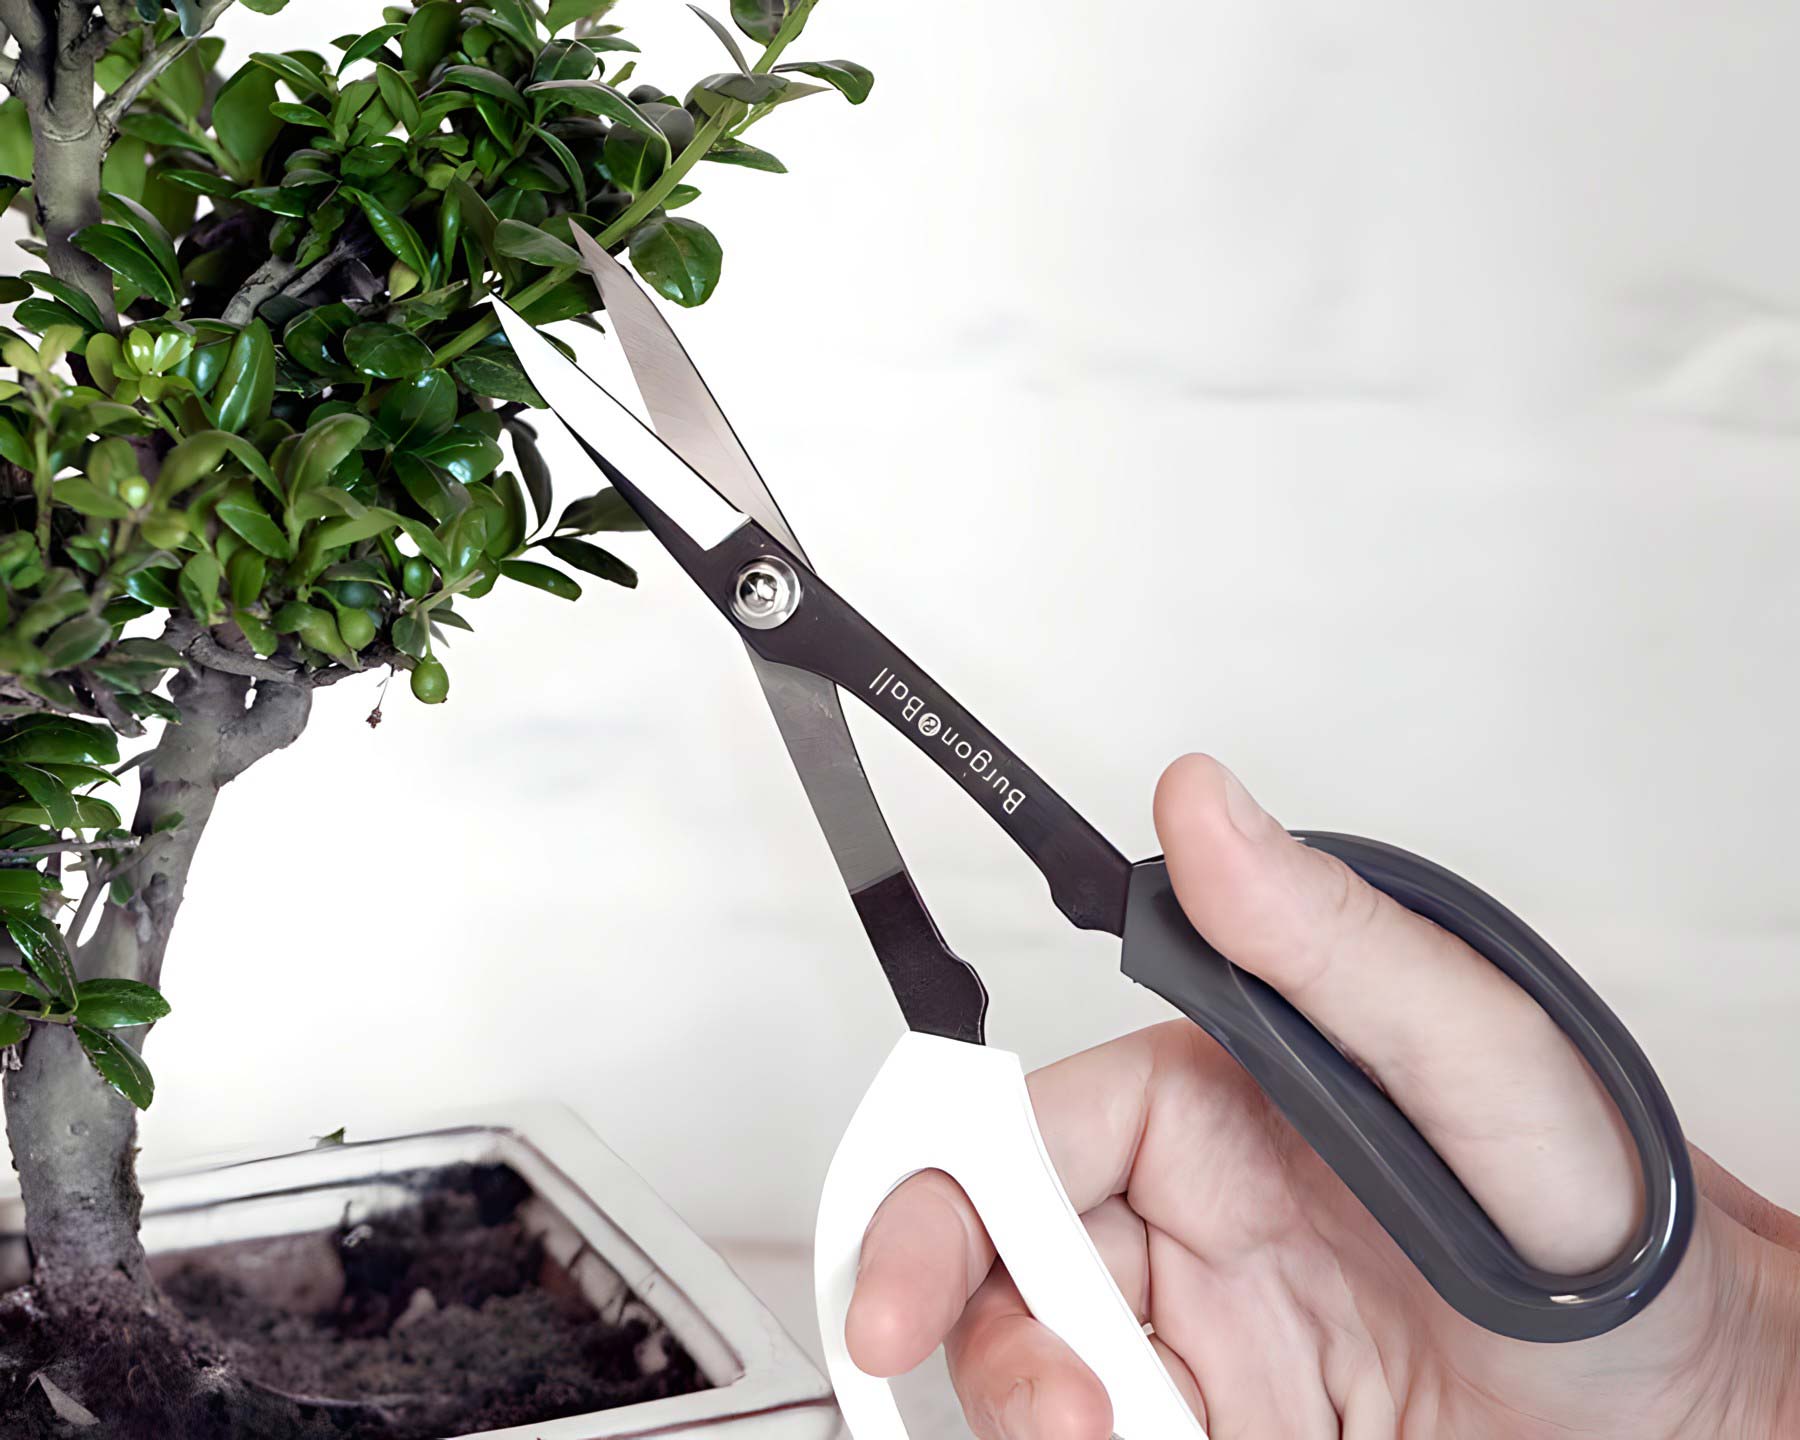 Japanese Pruning Scissors are designed for pruning and maintenance of bonsai trees, but also useful for other indoor plants.